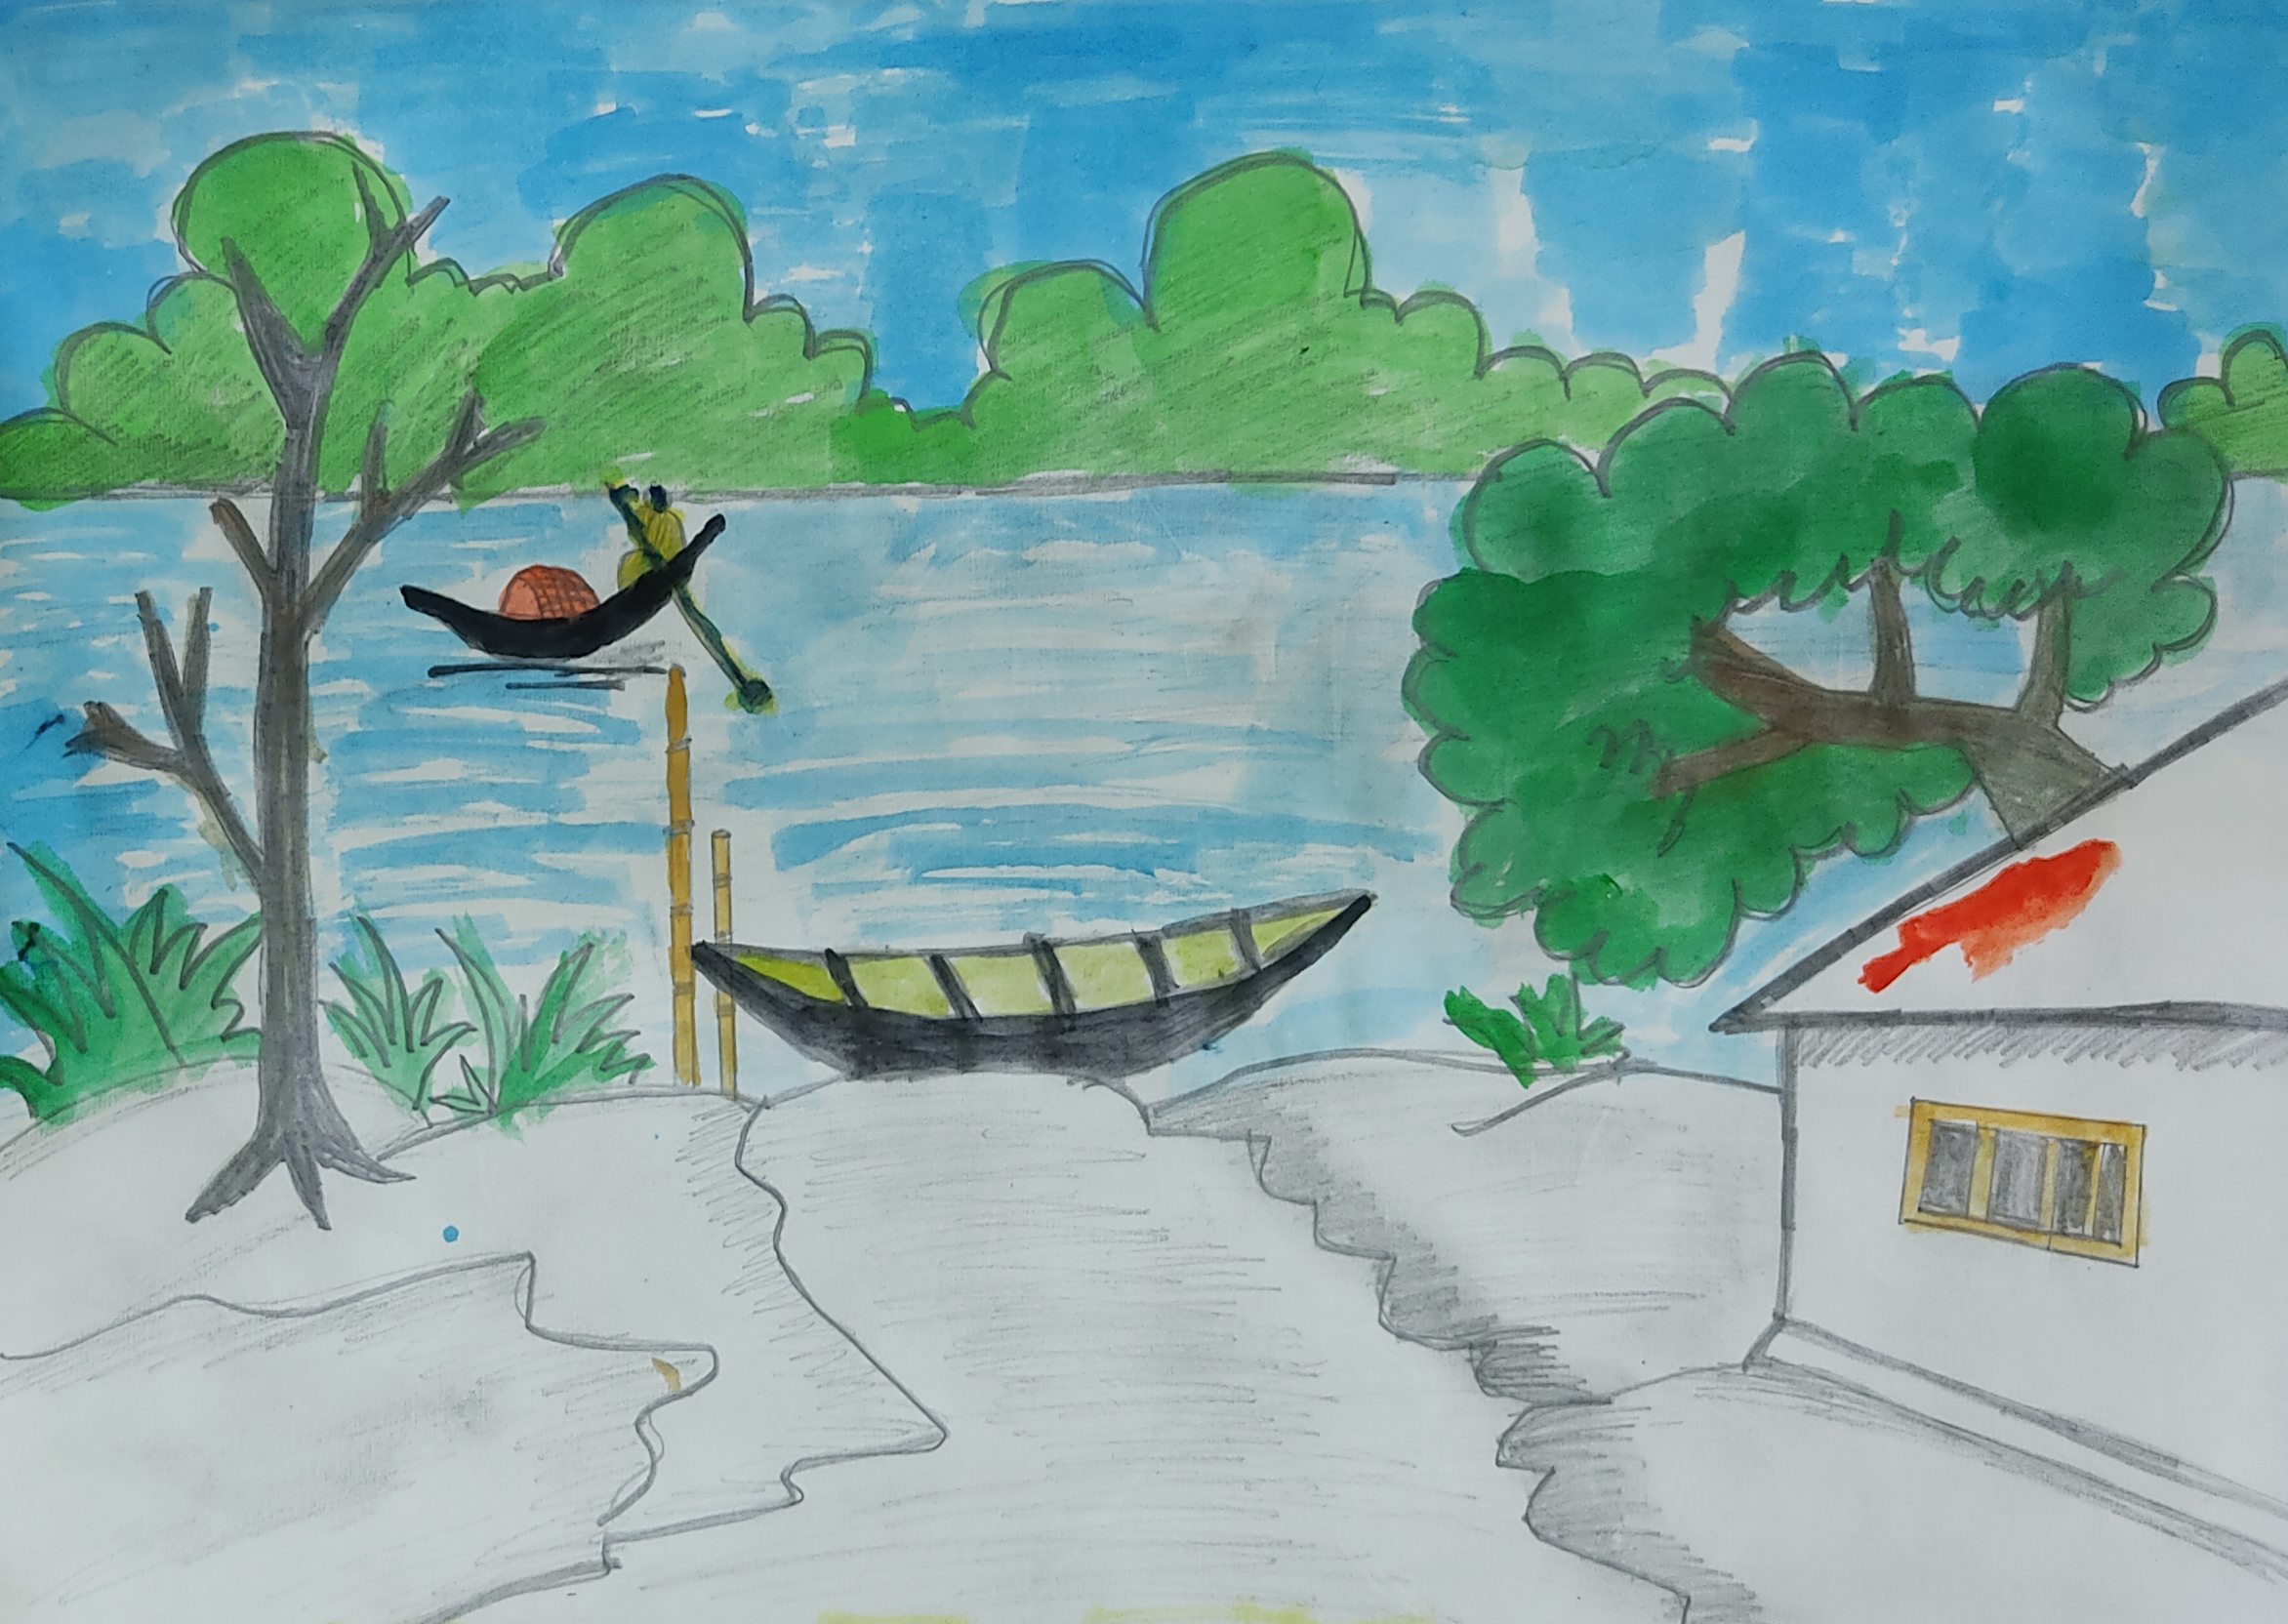 Child's Drawing With Colored Pencils Of Rural Landscape With Road And  Bridge Over River. Stock Photo, Picture and Royalty Free Image. Image  141656667.